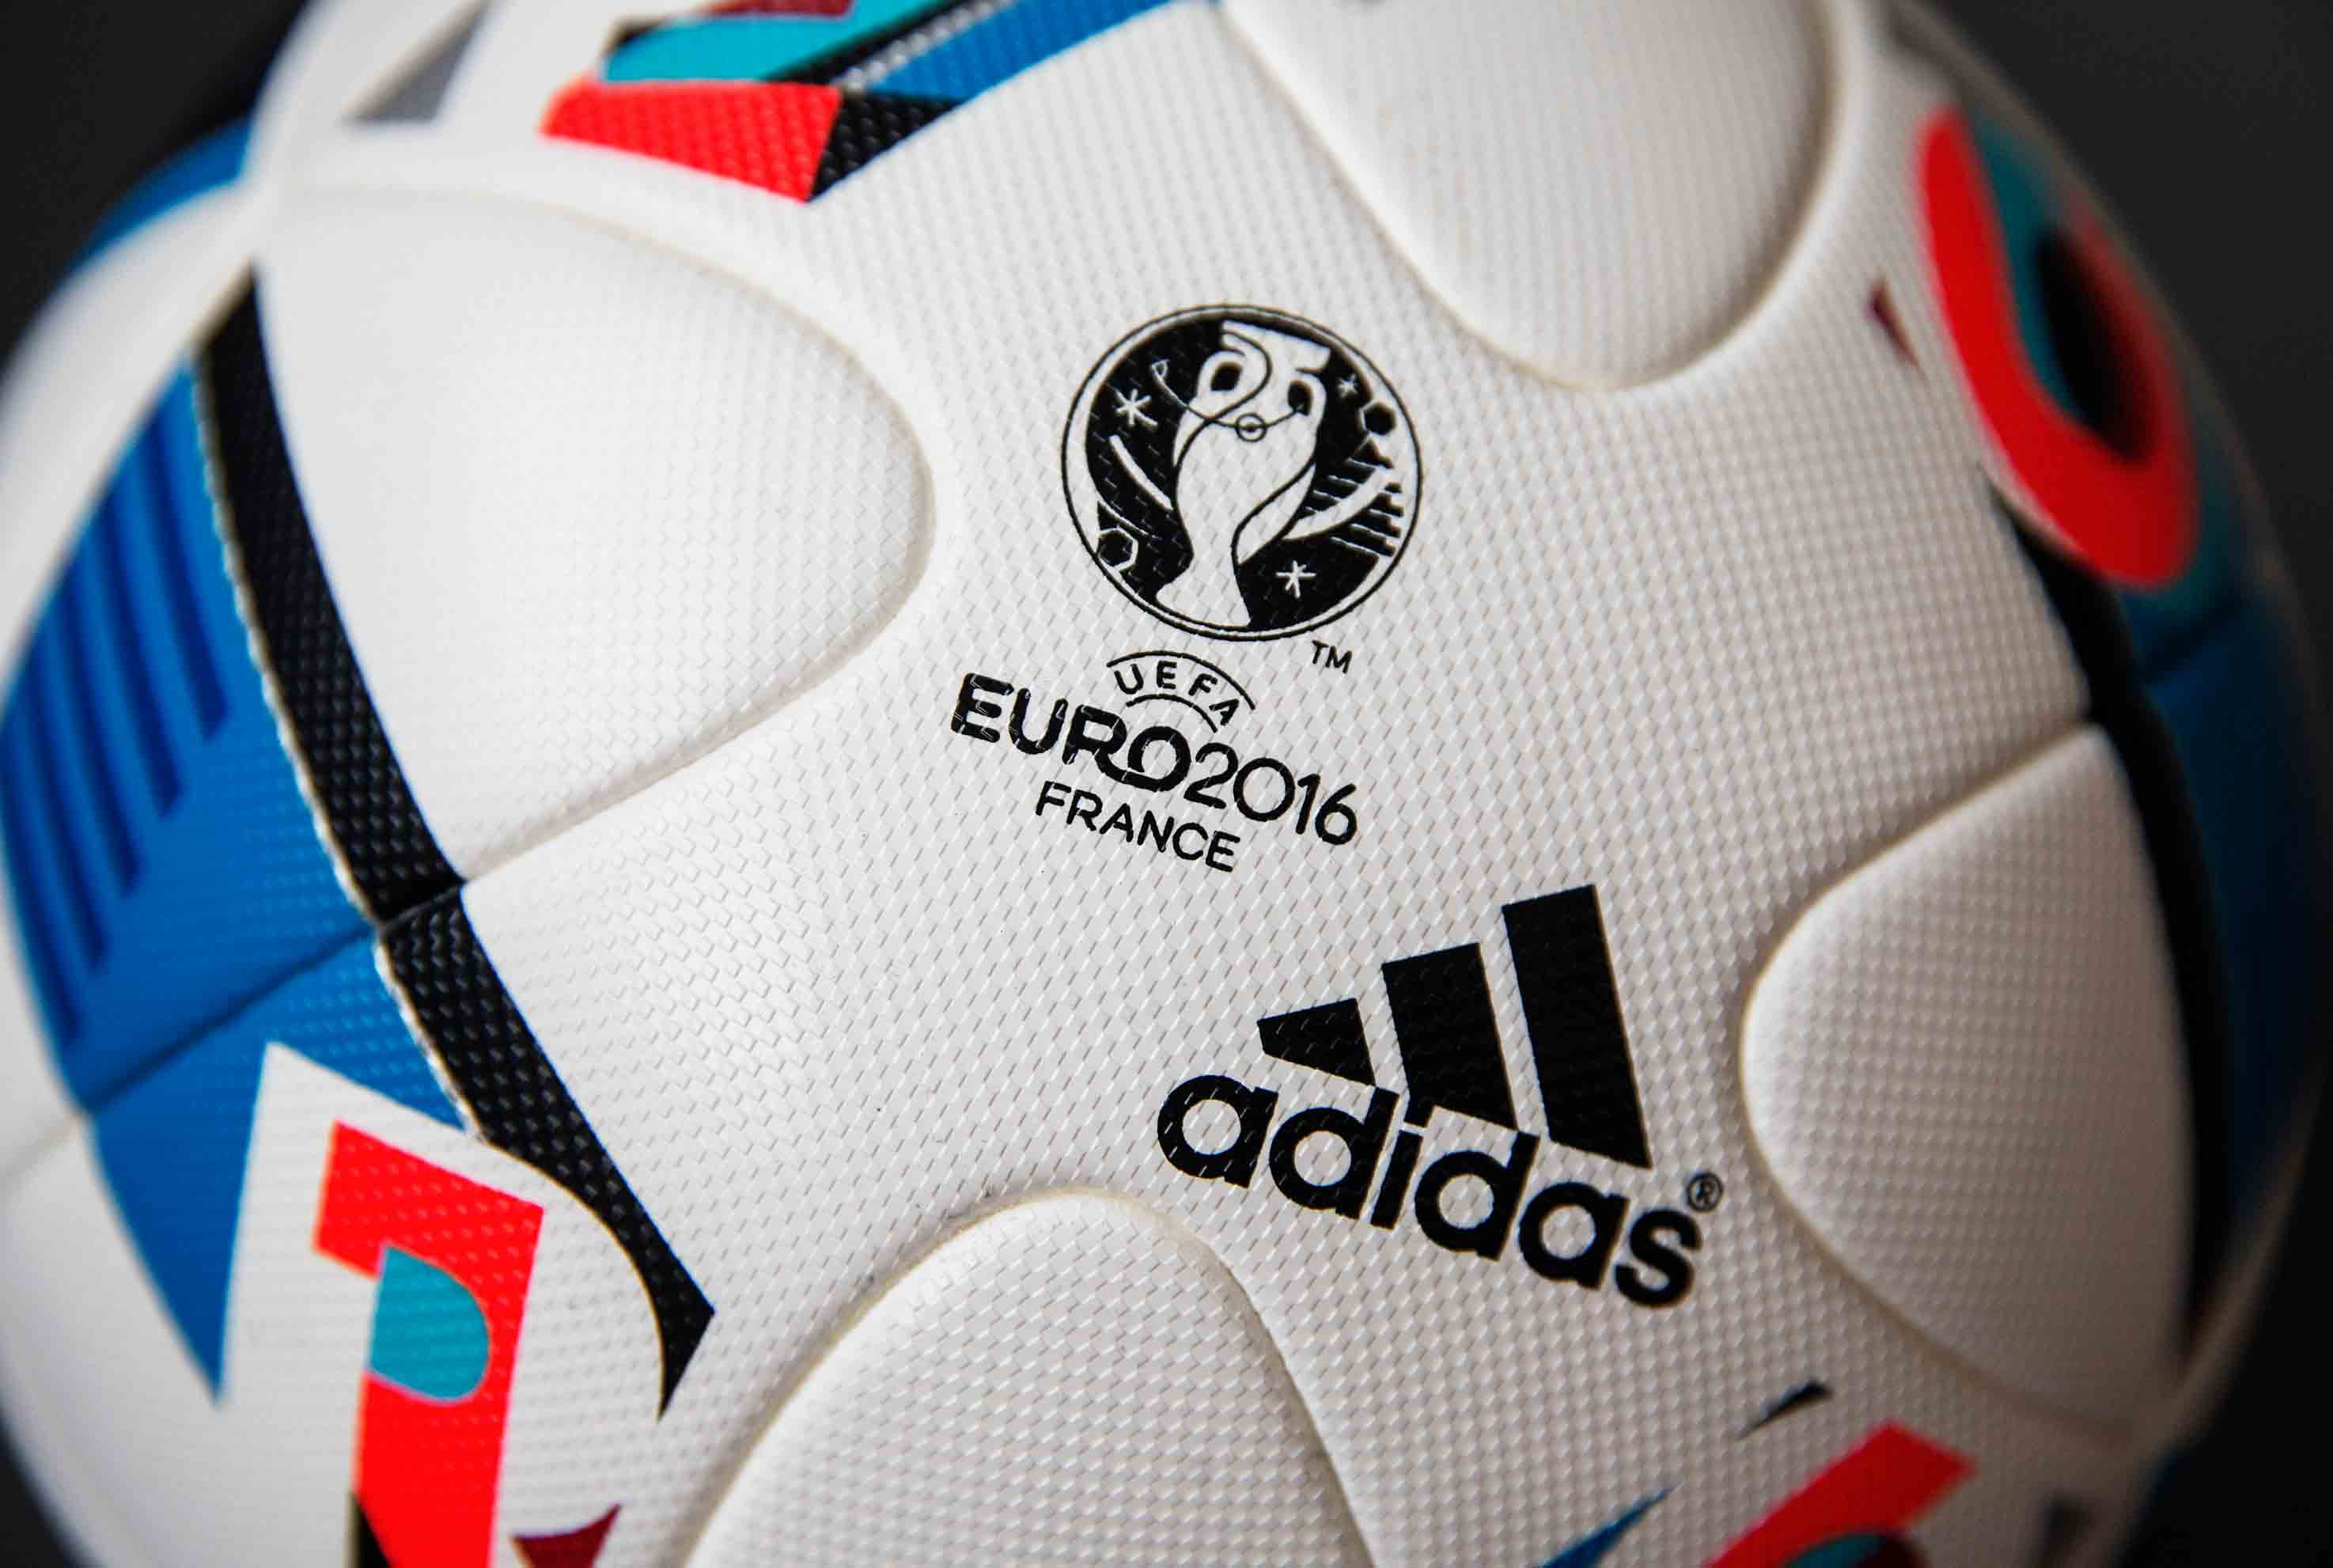 blue, red, and white adidas volleyball, uefa, euro 2016, france